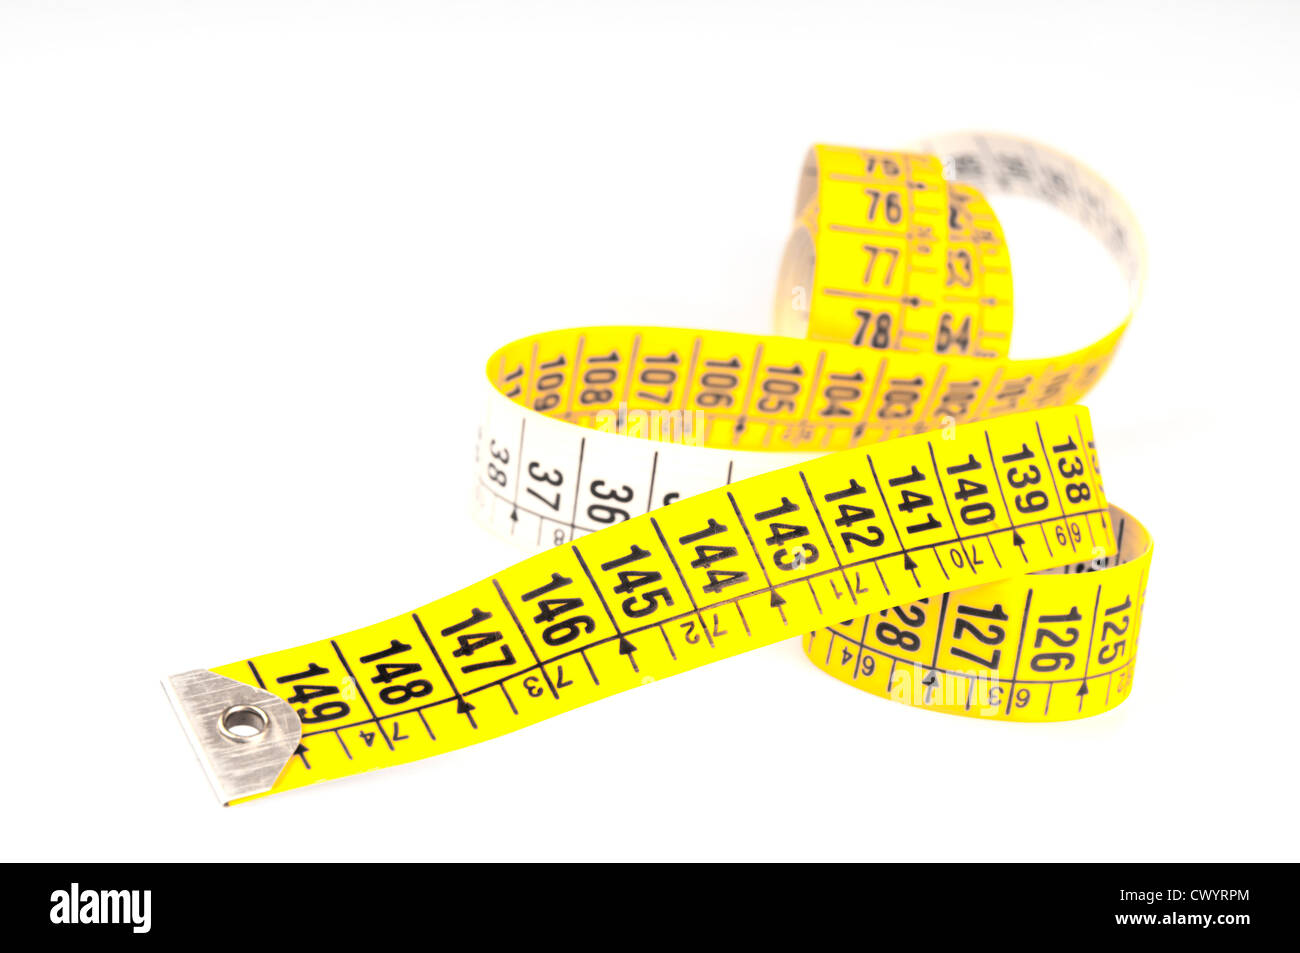 Tailors tape measure cut out against a white background. Yellow